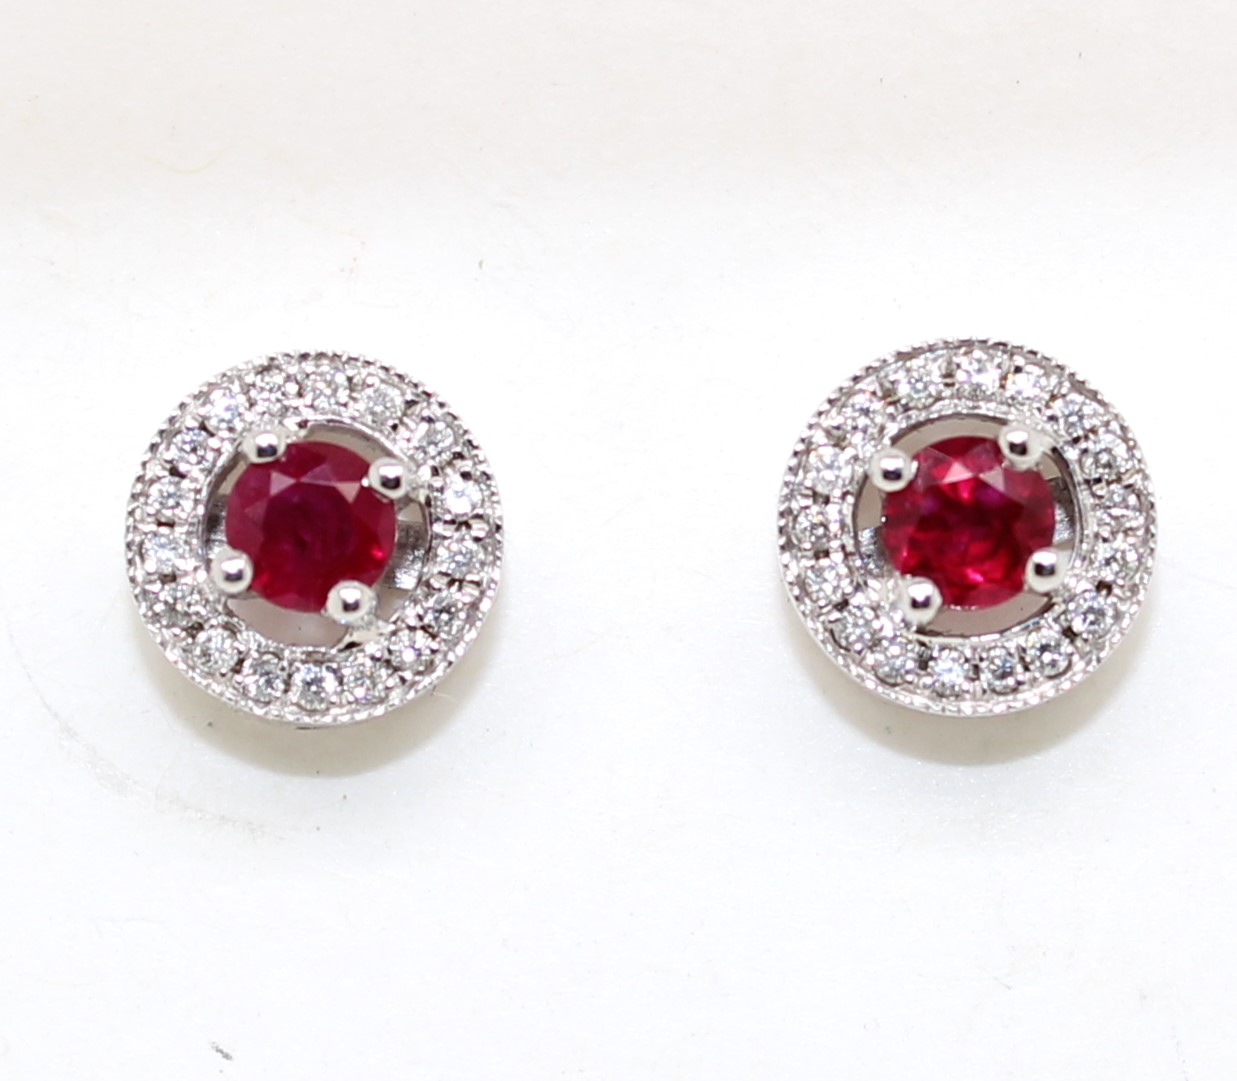 Each earring contains 1 round cut ruby prong set in the center surrounded by 17 full cut prong set diamonds. post and friction backs. 2 rubies = .56 carat 34 diamonds = .15 carat H-I SI1-2